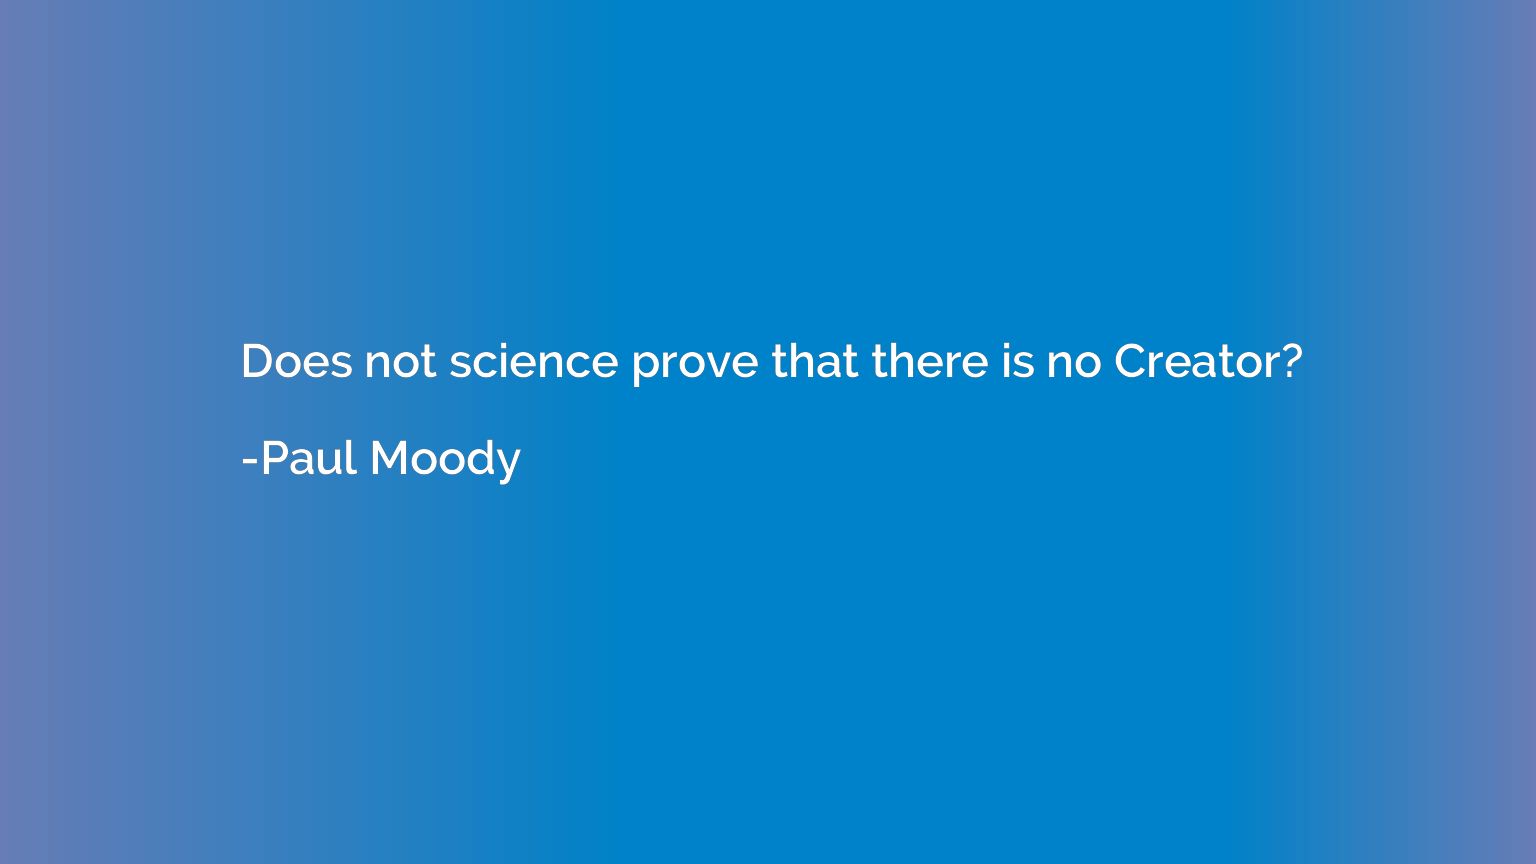 Does not science prove that there is no Creator?